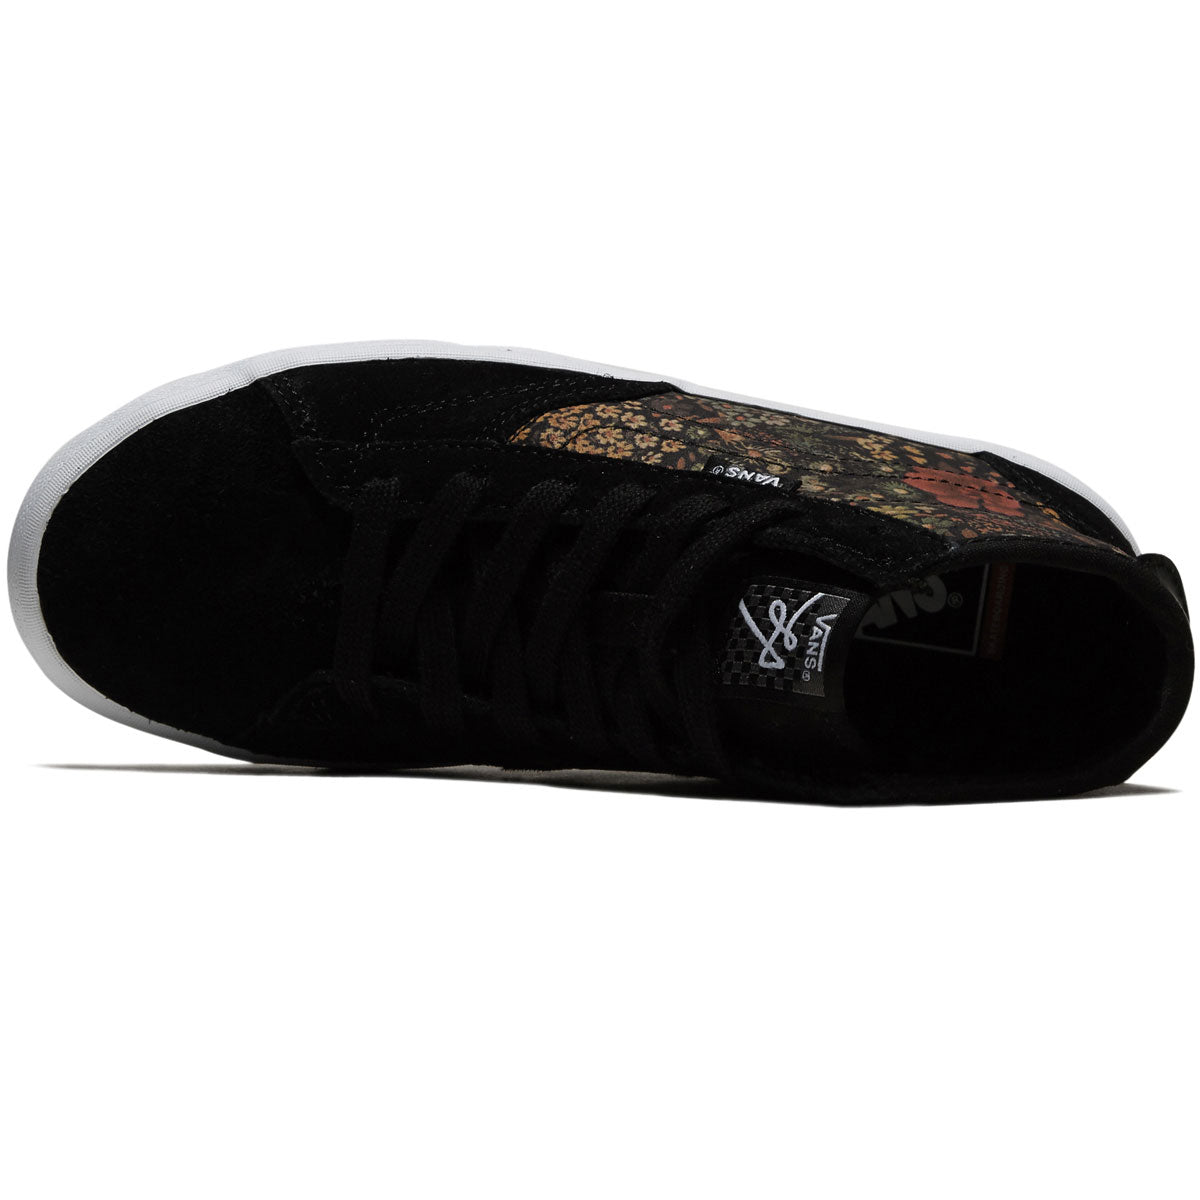 Vans Youth Little Lizzie Shoes - Black/White/Multi image 3